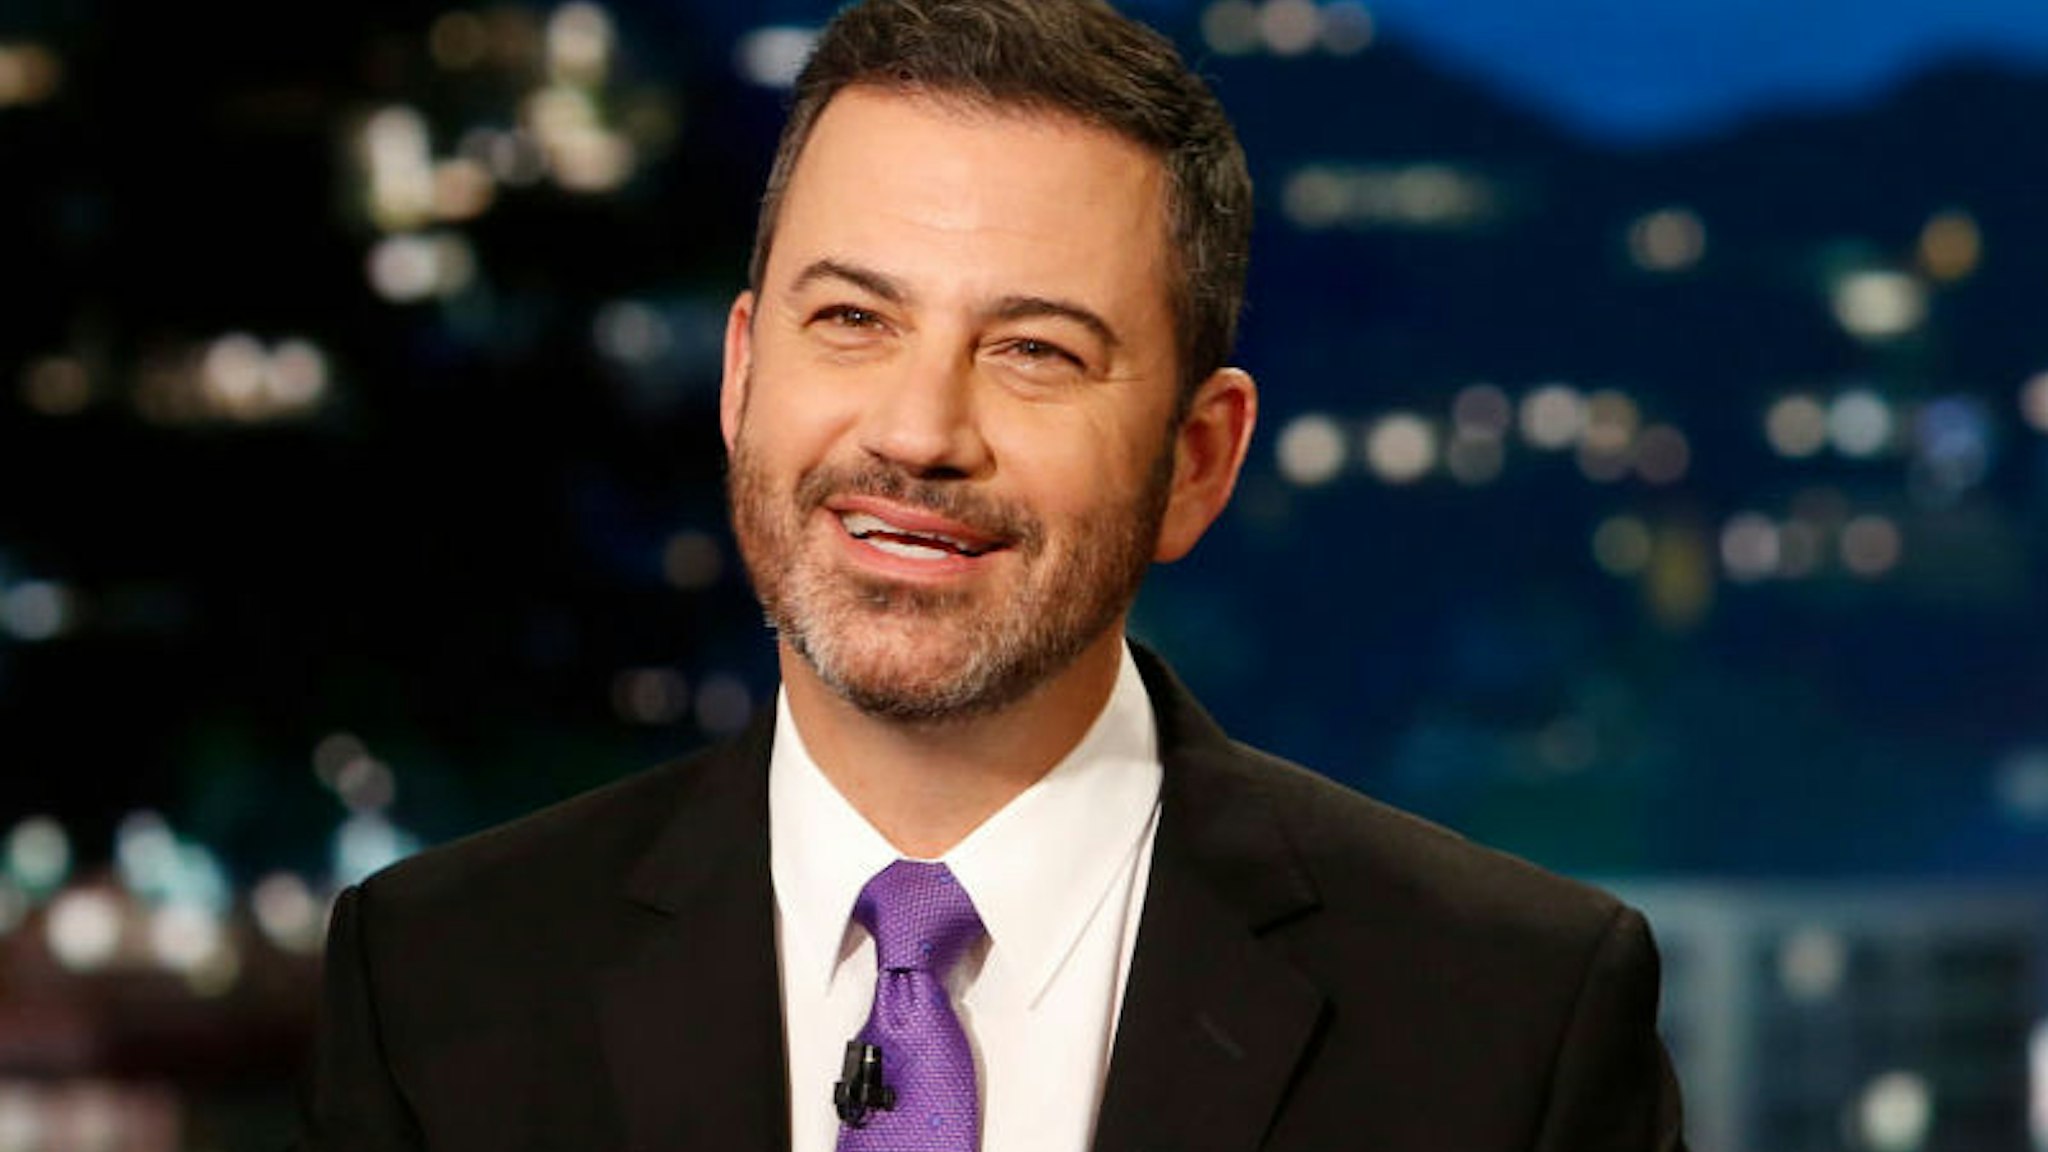 "Jimmy Kimmel Live!" airs every weeknight at 11:35 p.m. EDT and features a diverse lineup of guests that include celebrities, athletes, musical acts, comedians and human interest subjects, along with comedy bits and a house band.